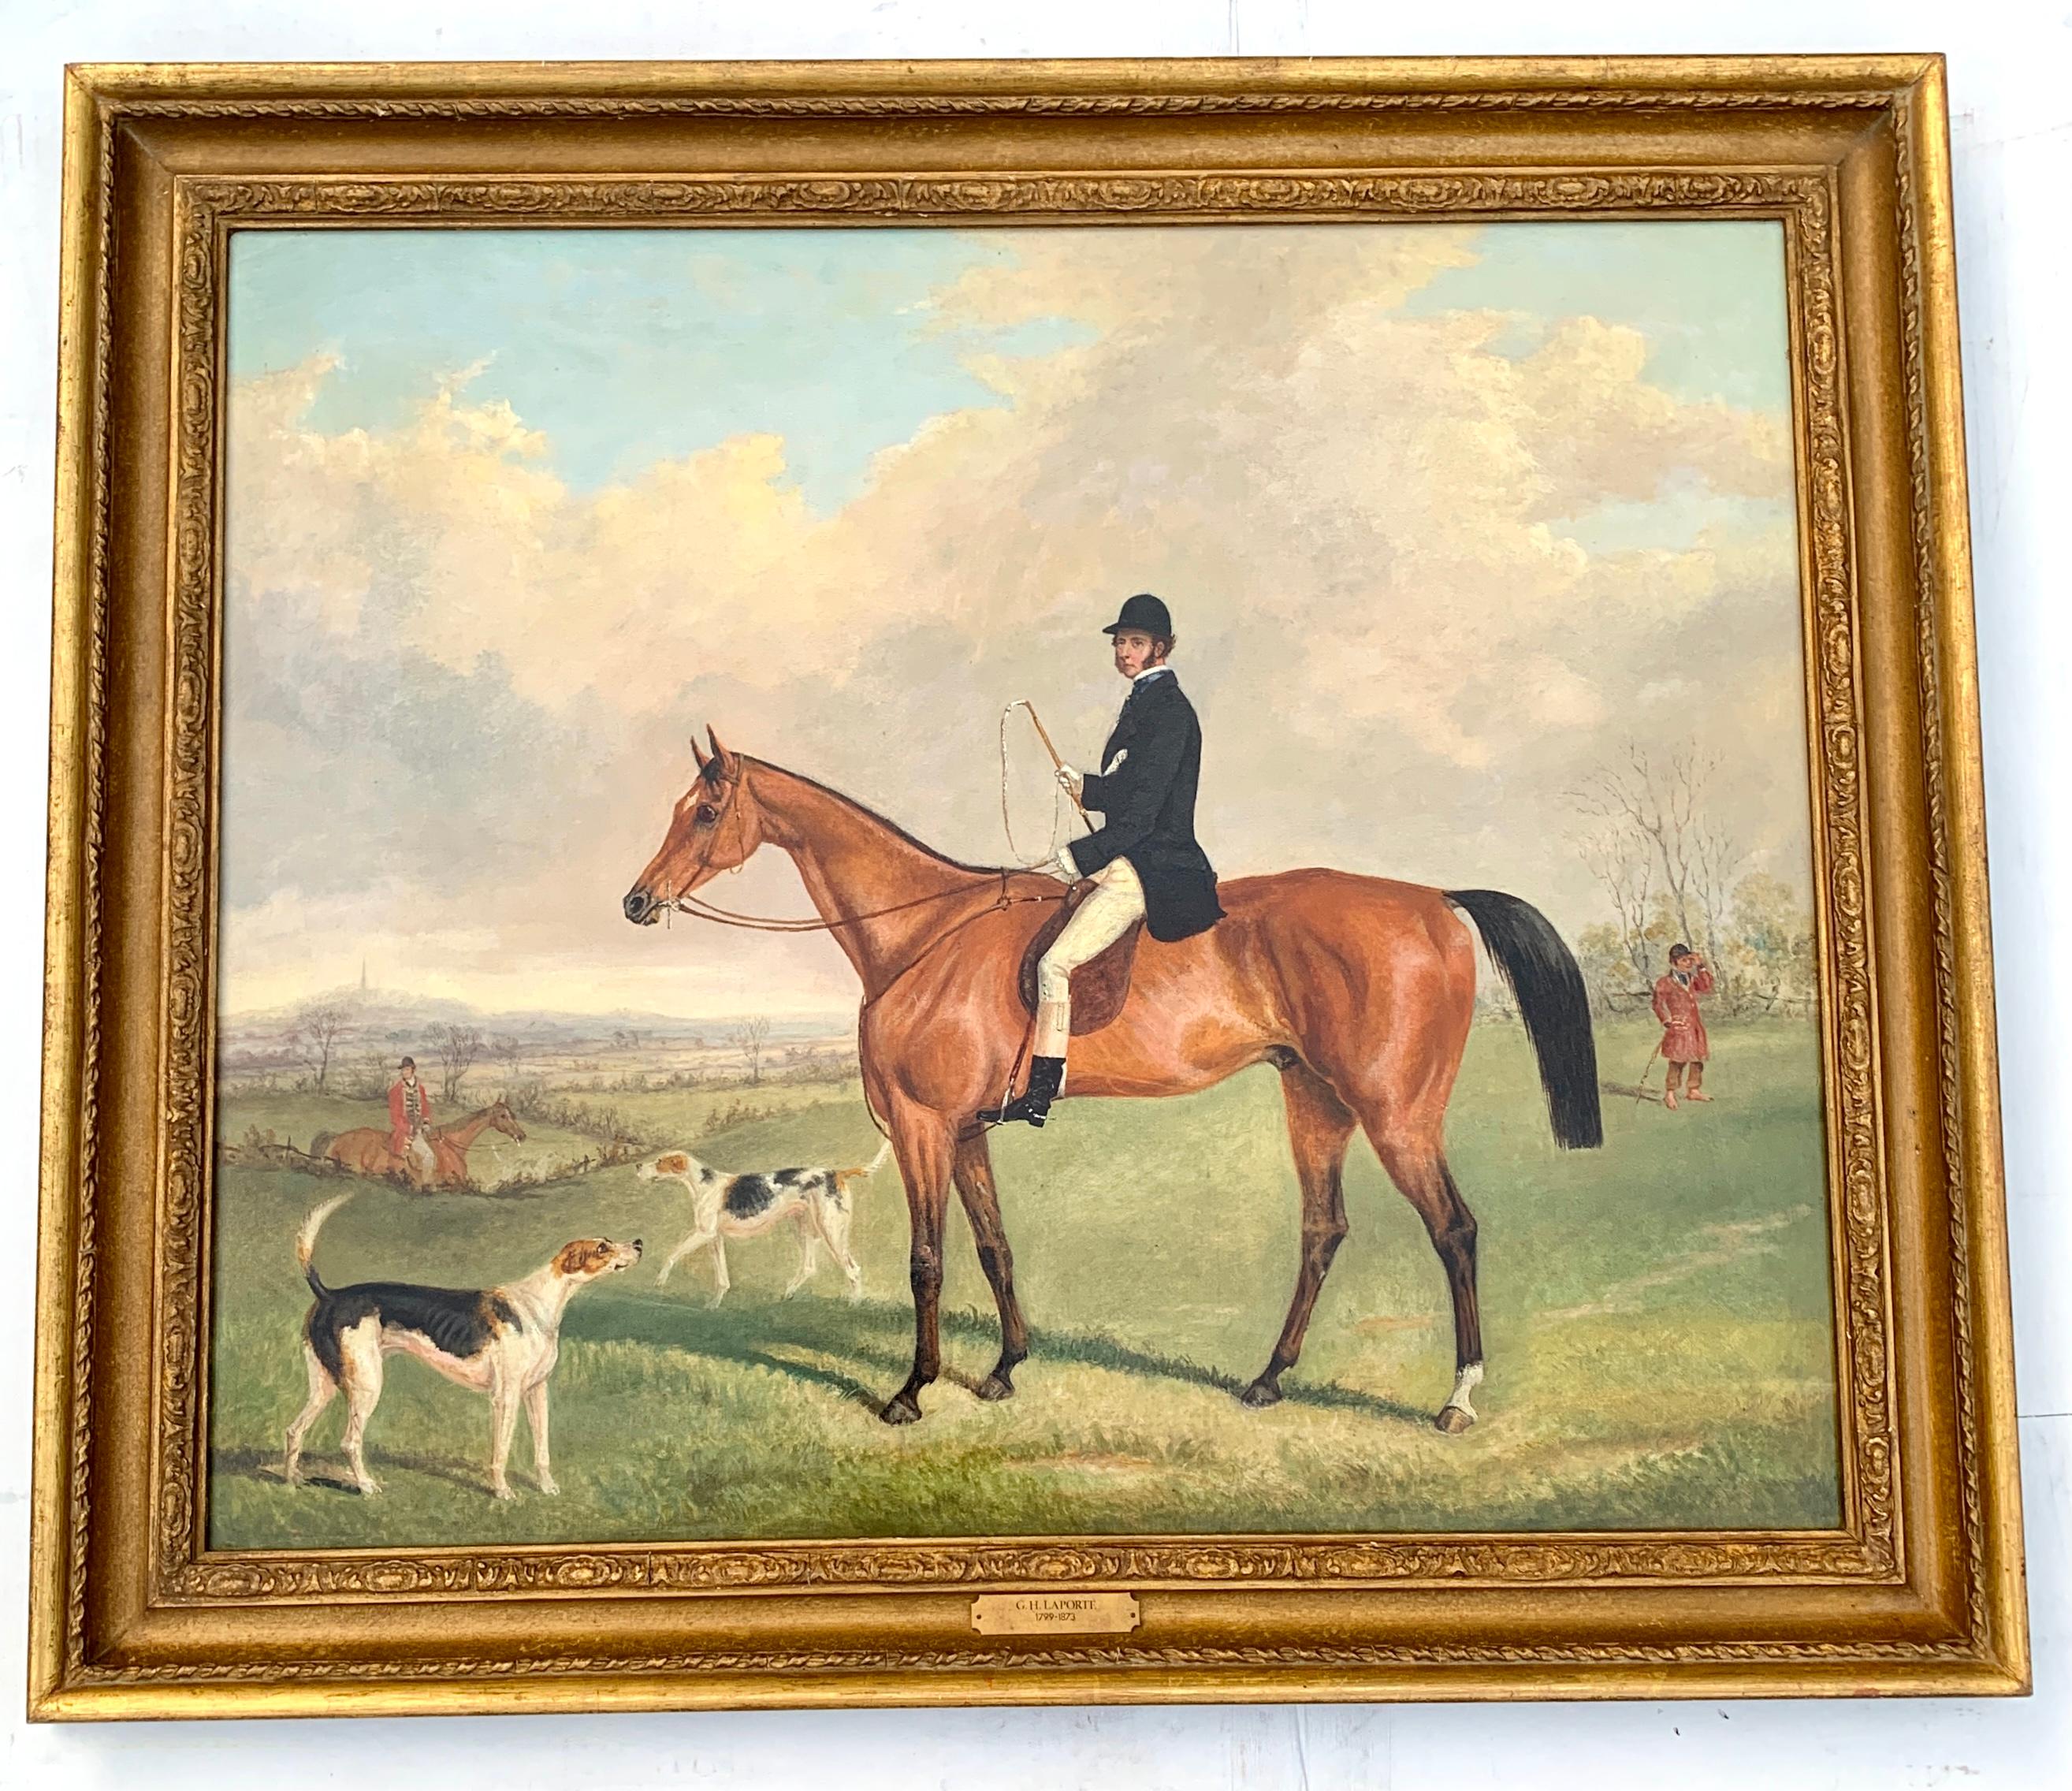 George Henry Laporte Animal Painting - Fox Huntsman seated on a Bay horse, with hounds in an English landscape.